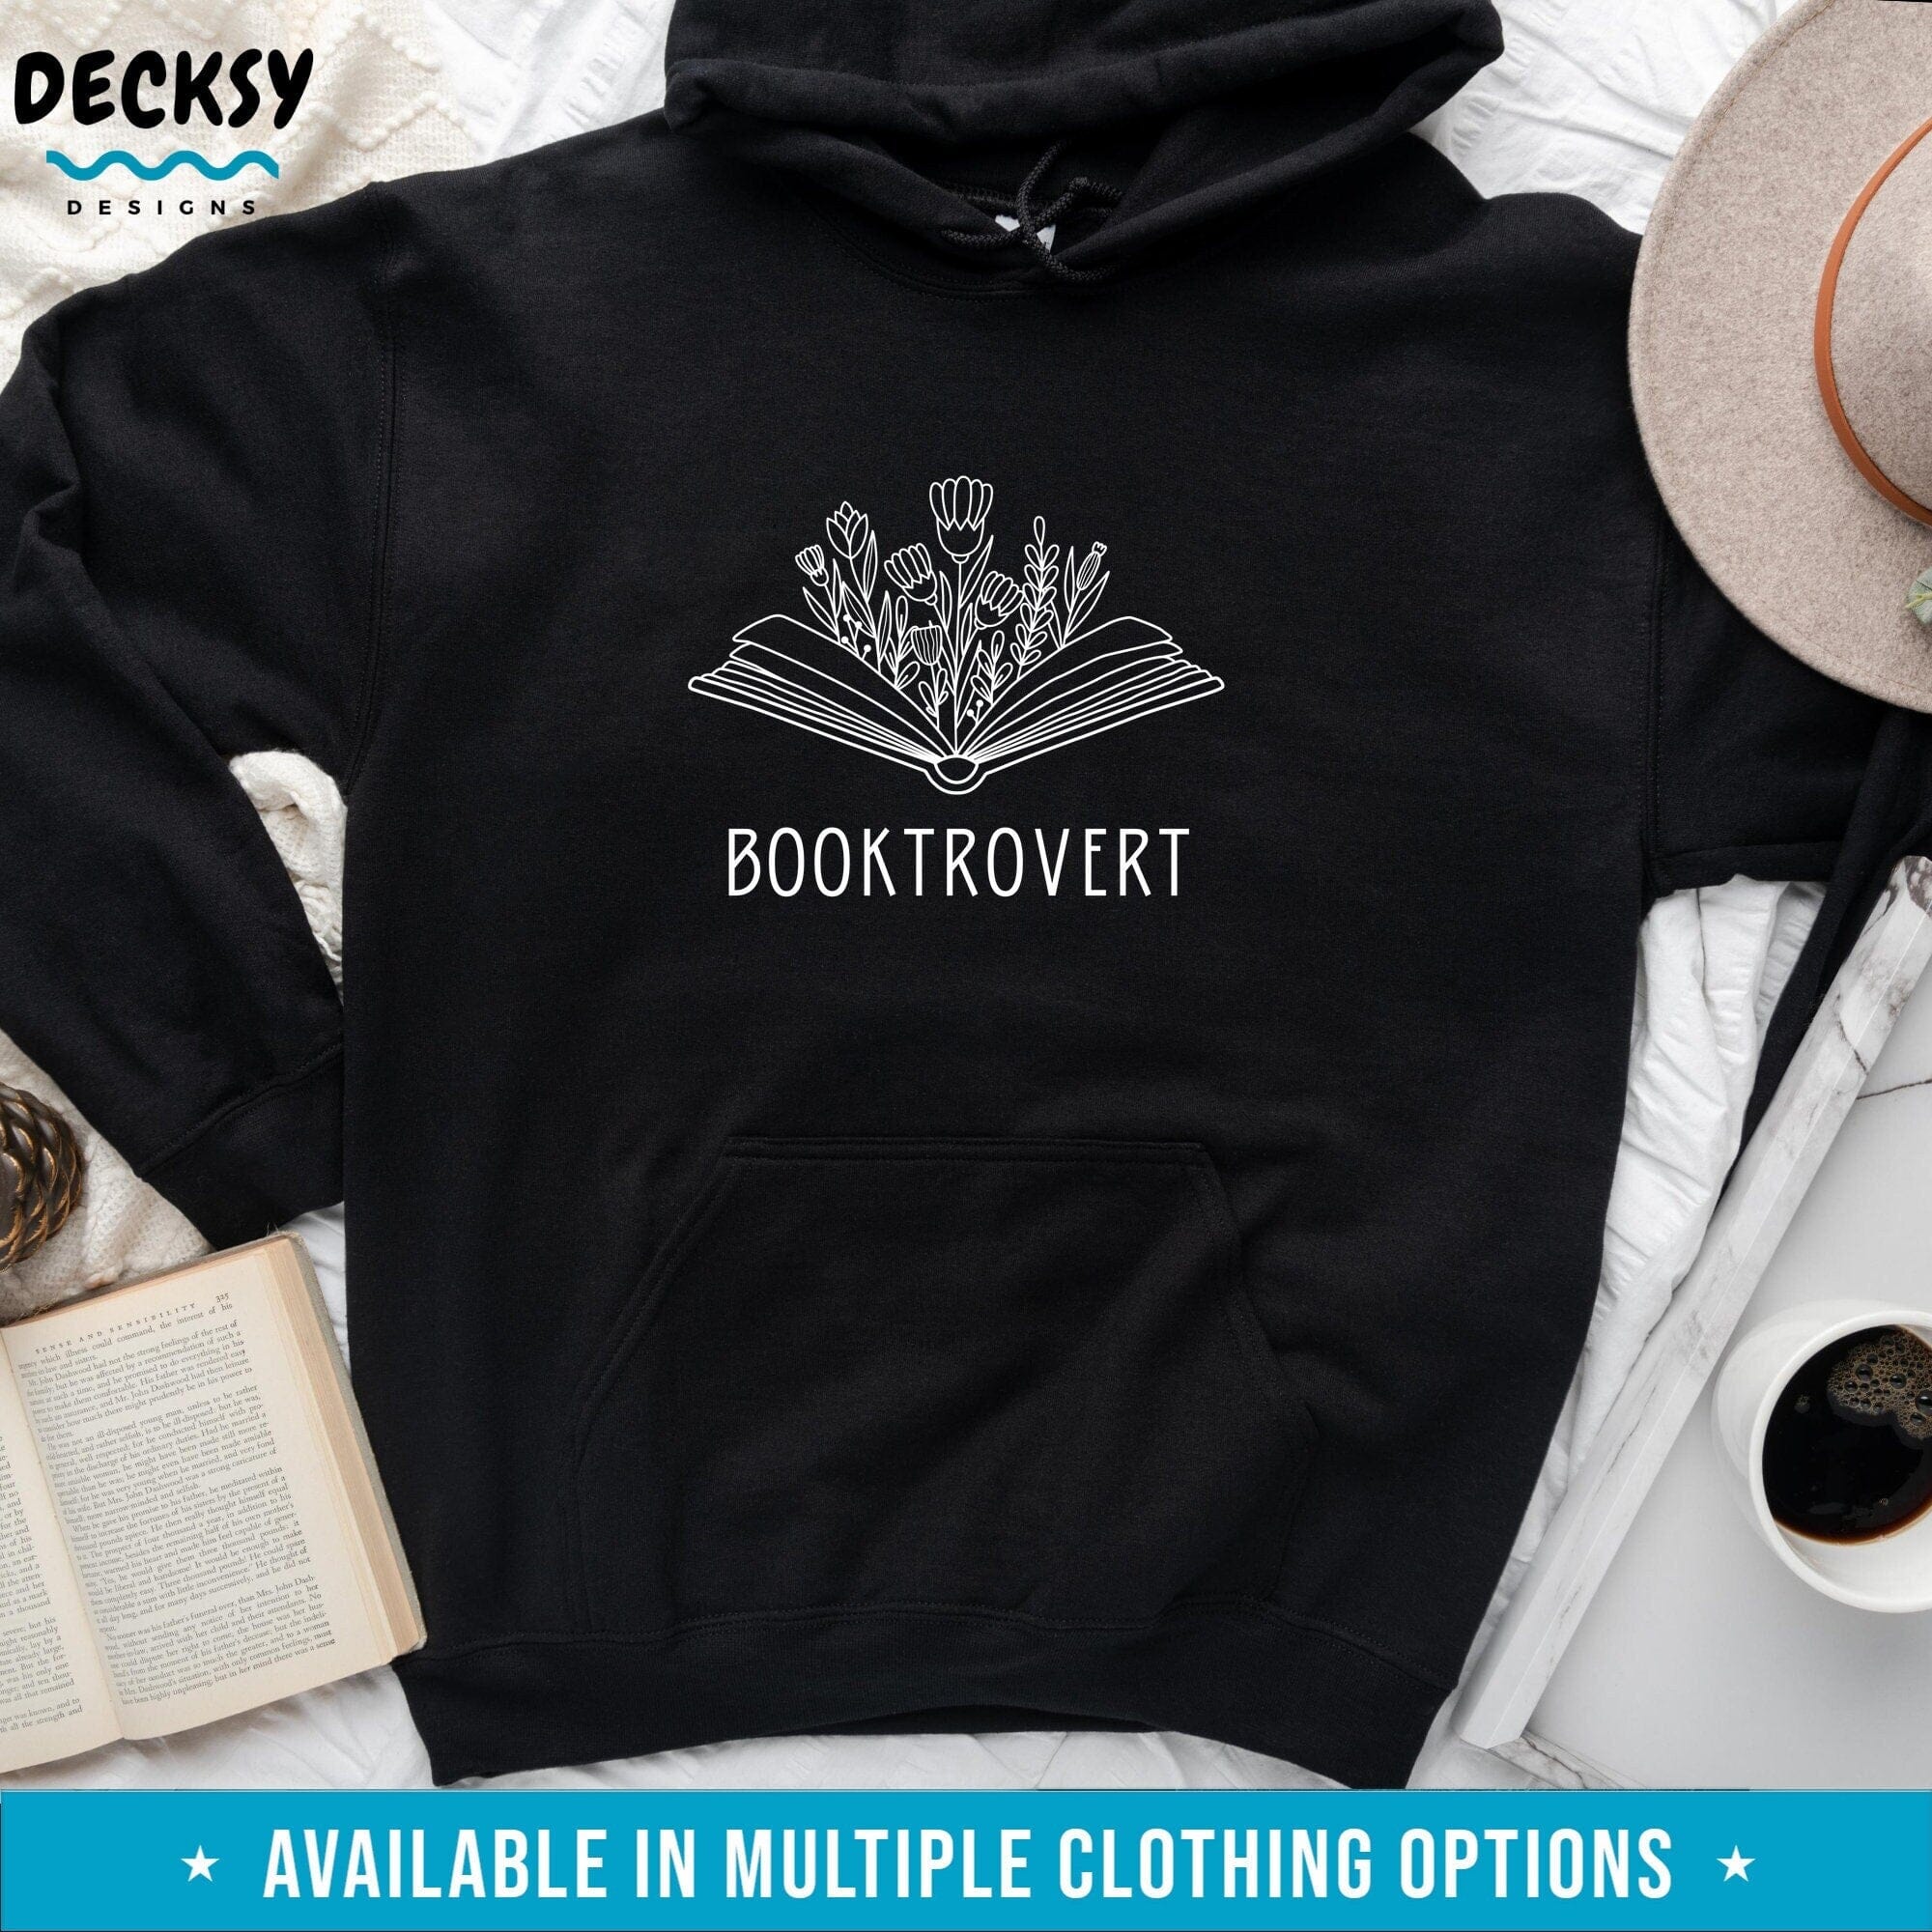 Book Lover Shirt, Booktrovert Gift-Clothing:Gender-Neutral Adult Clothing:Tops & Tees:T-shirts:Graphic Tees-DecksyDesigns